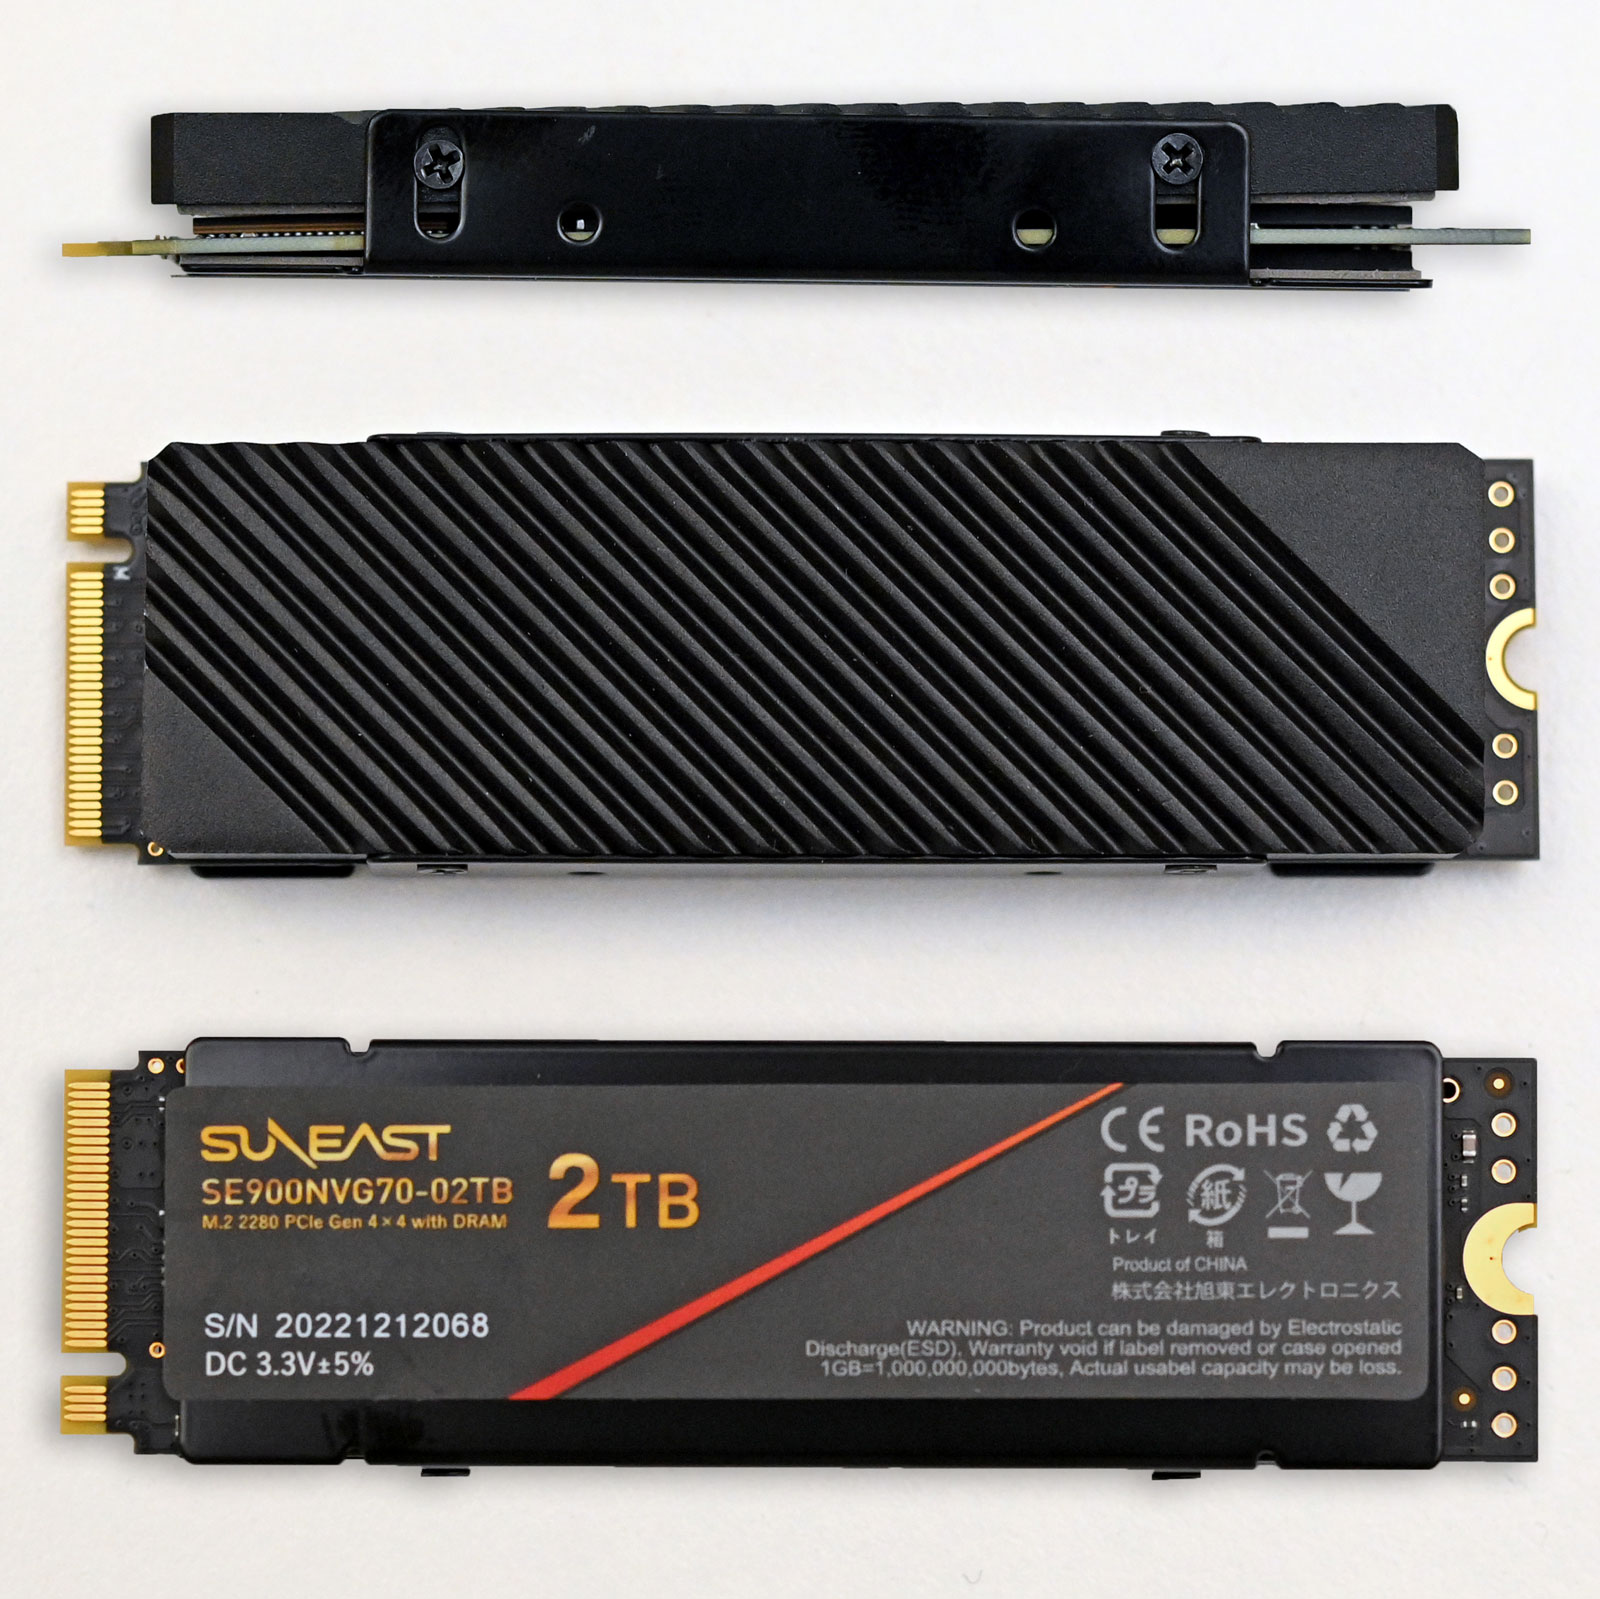 Amazon・楽天で激安販売!レビュー SUNEAST 2TB NVMe SSD 最大読込